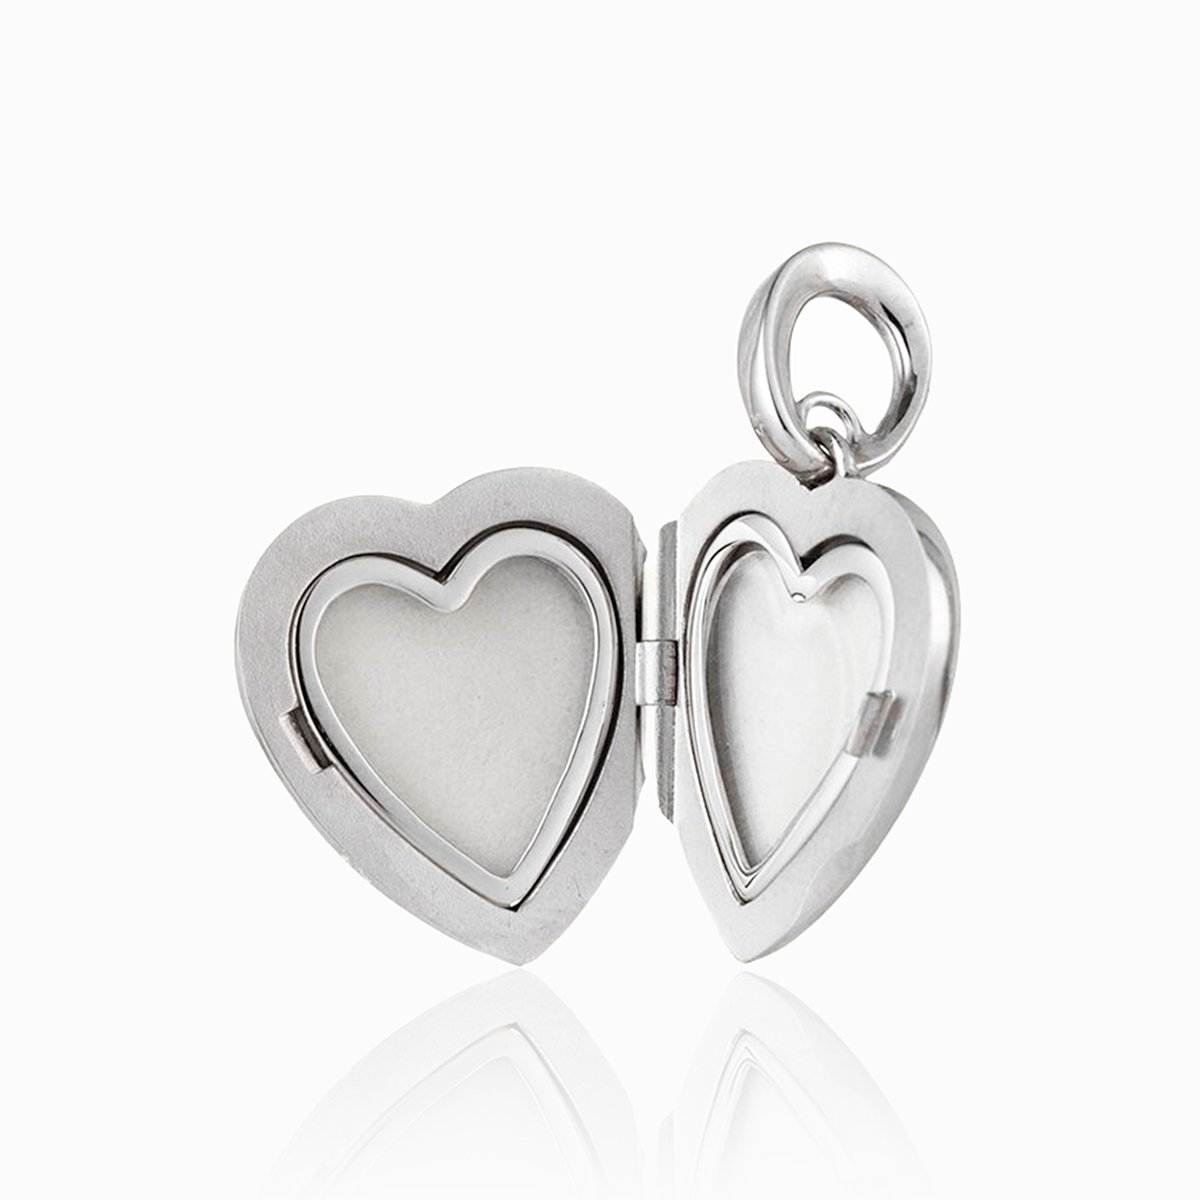 Open view of an 18 ct petitie white gold heart locket